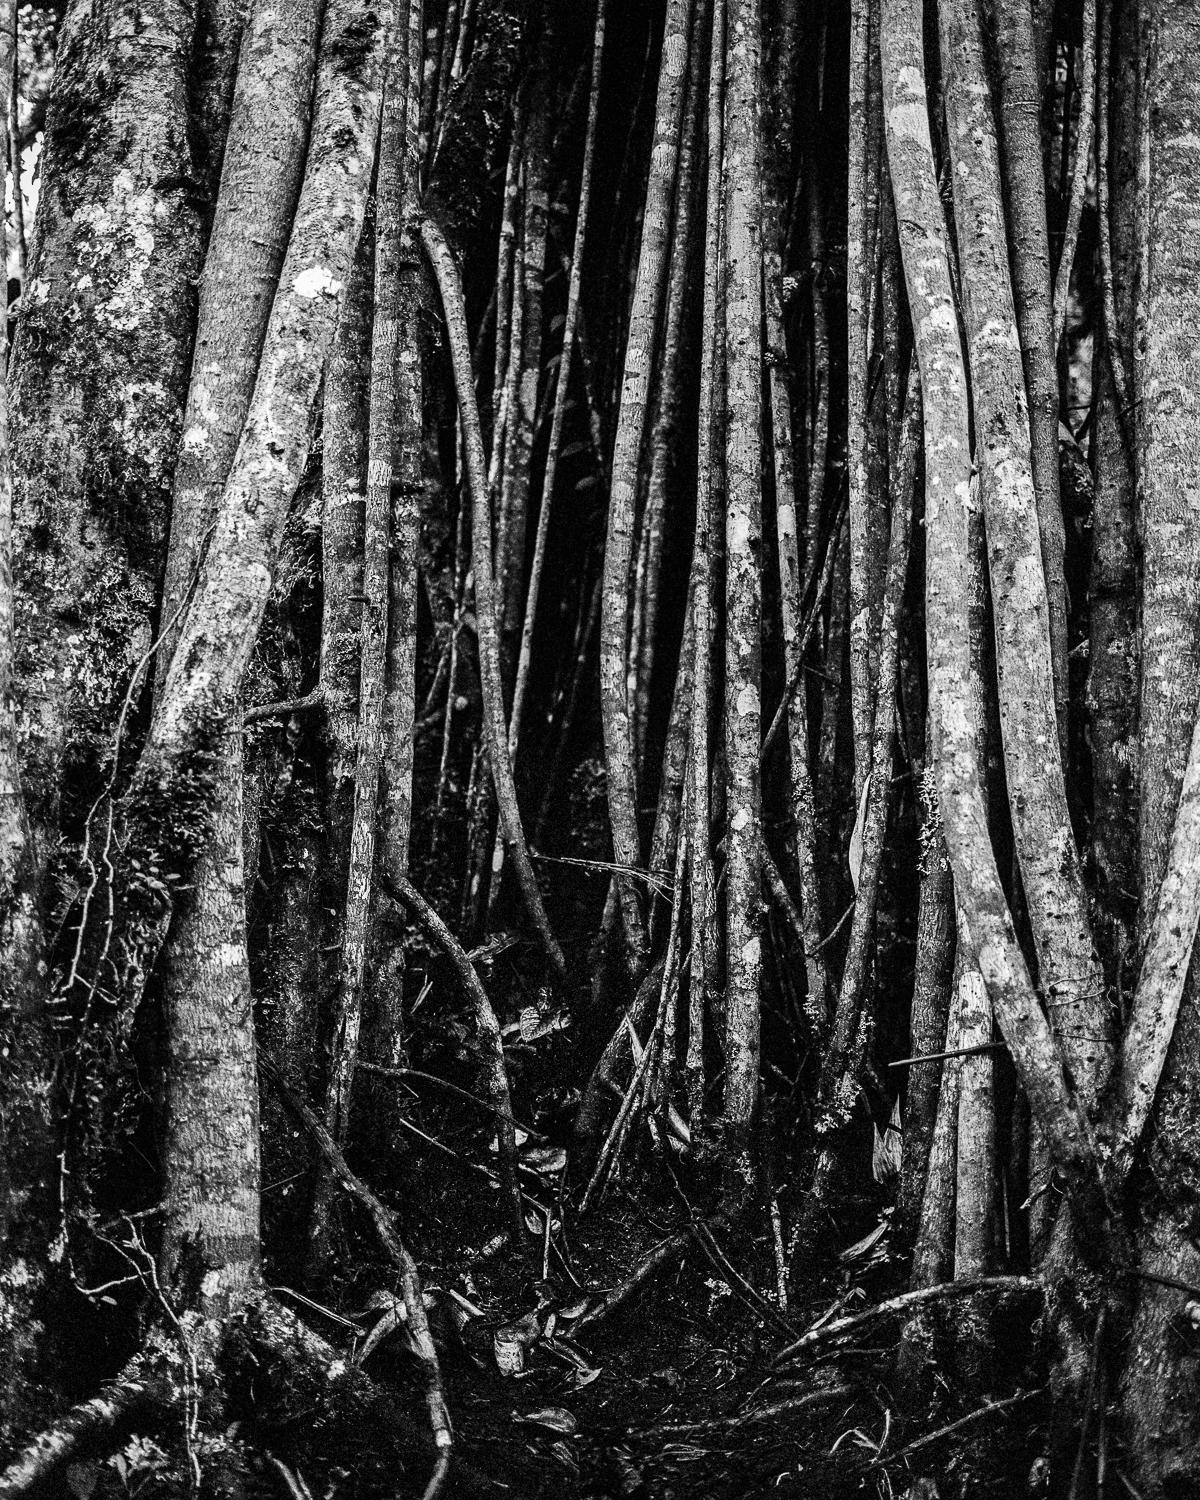 Miguel Winograd  Black and White Photograph - Raíces Selva Oscura, Silver Gelatin Print